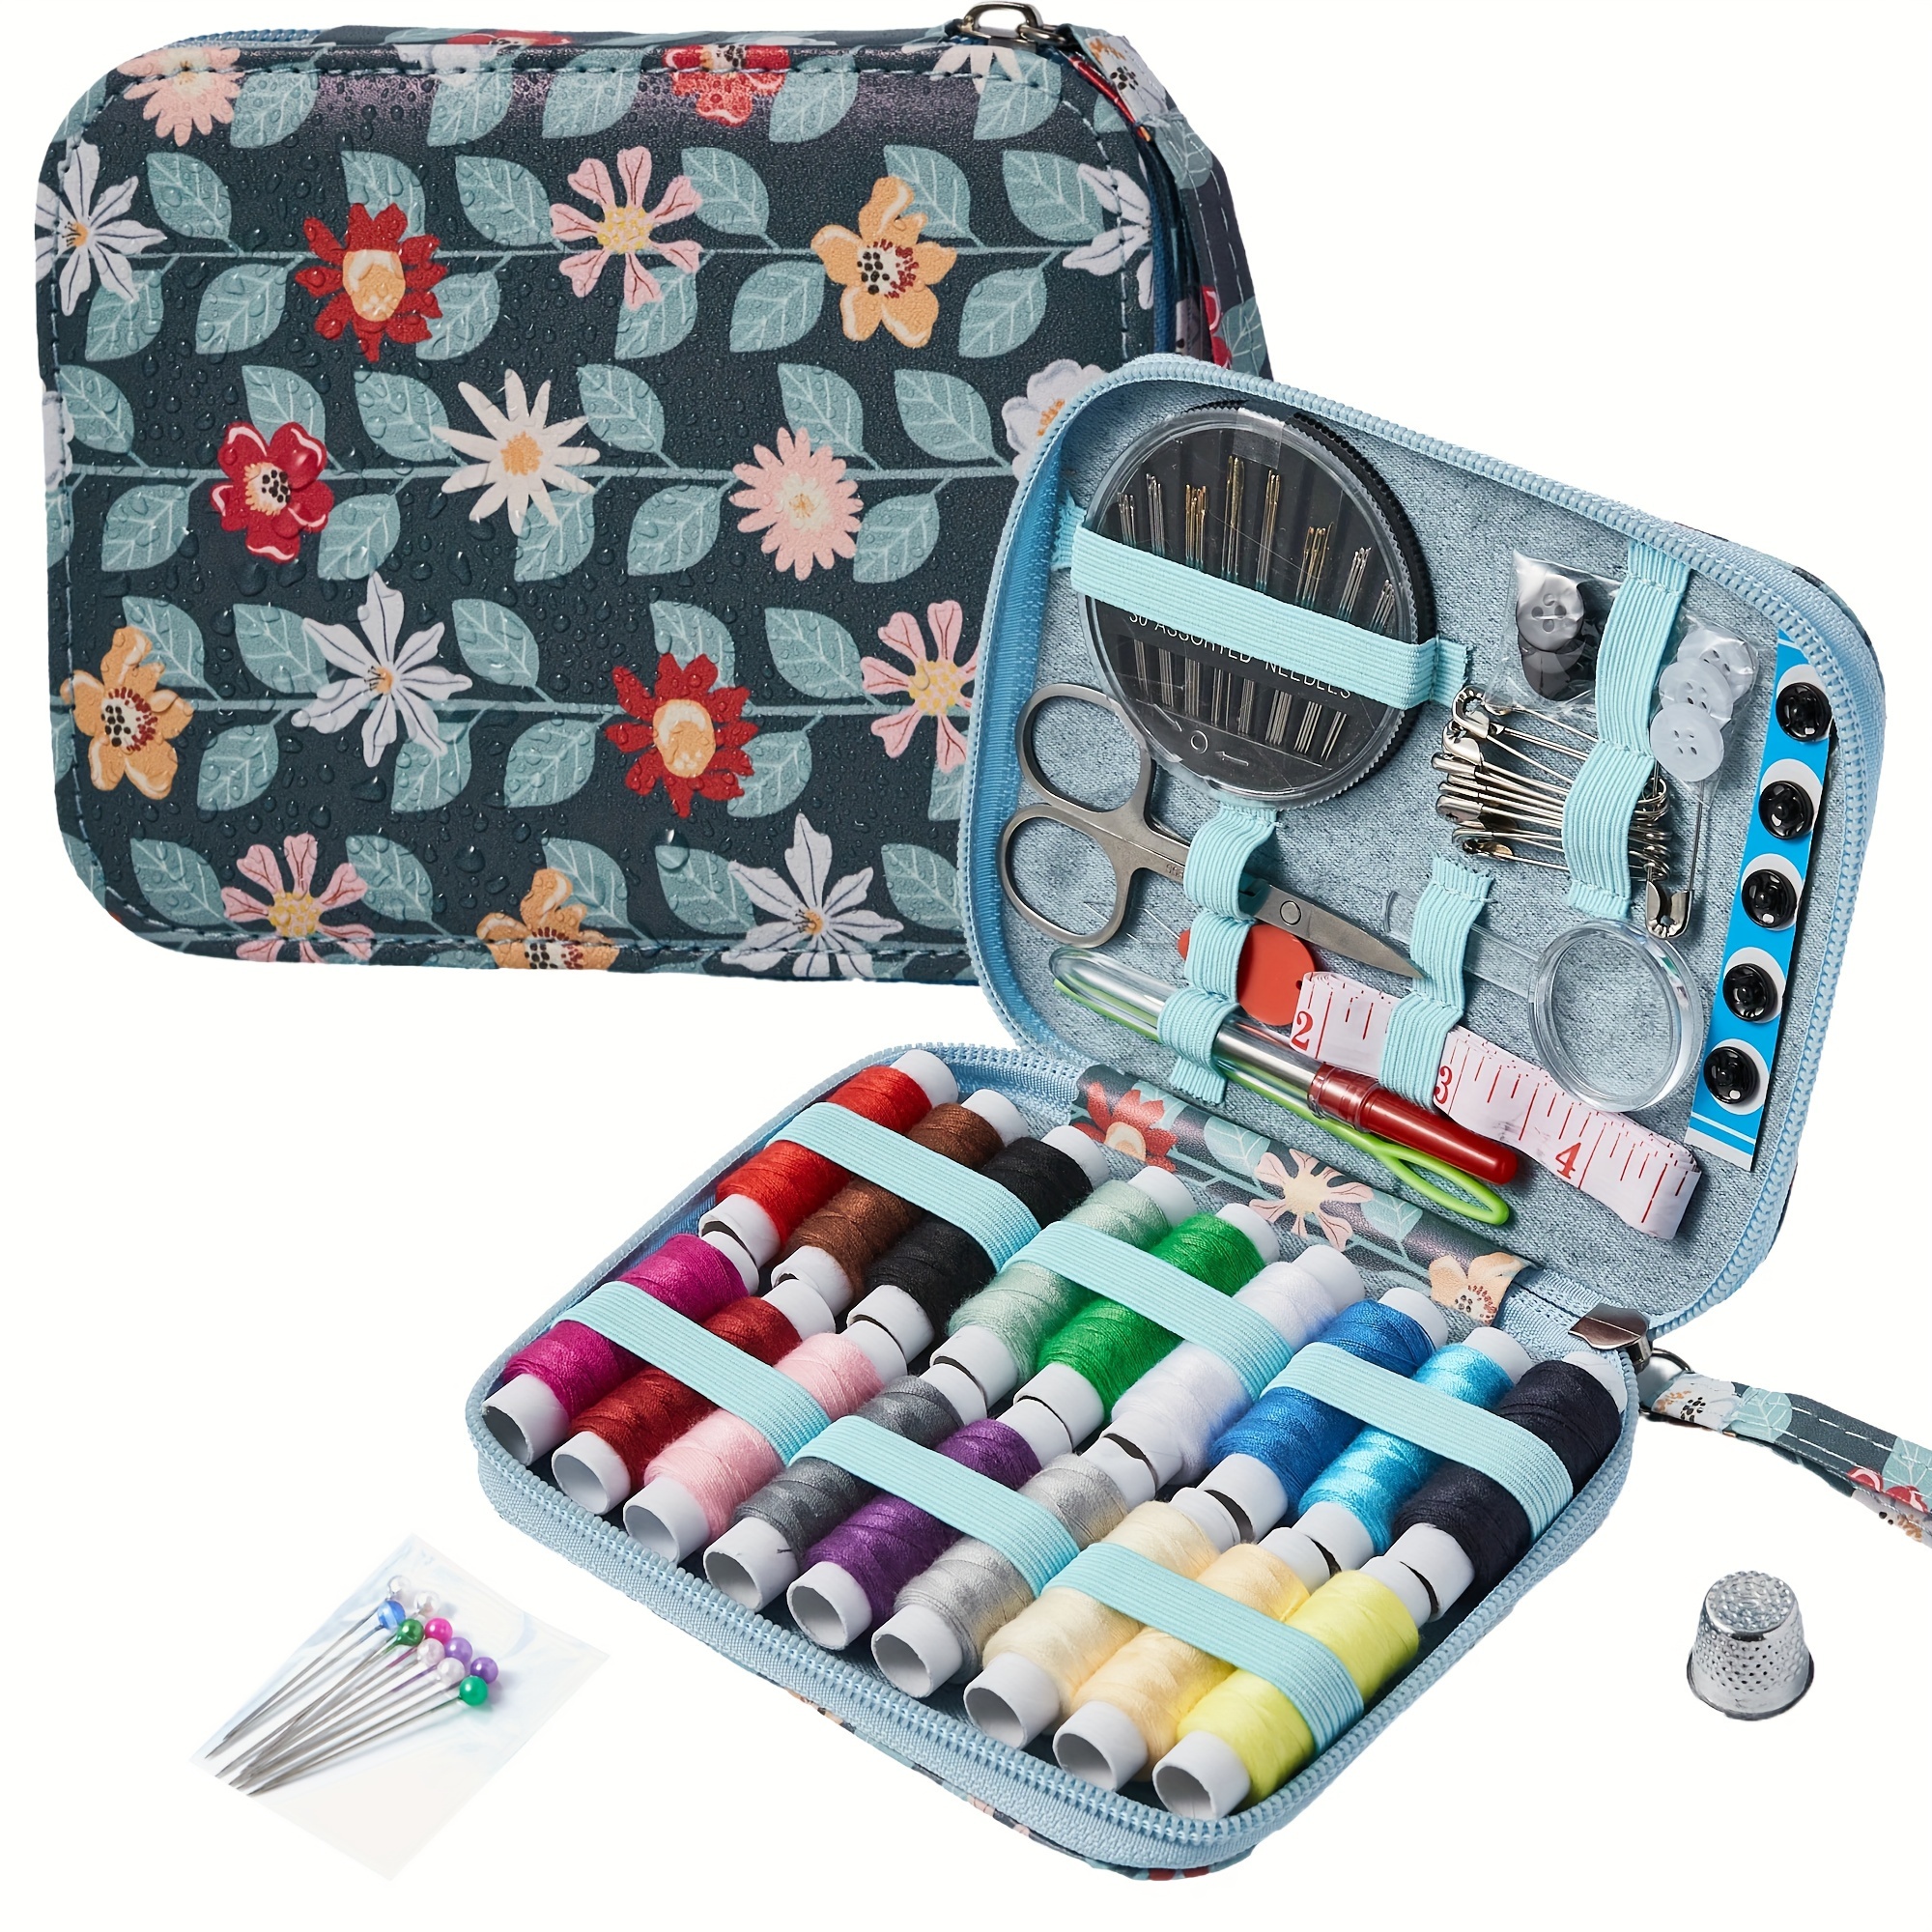 

Sewing Kit Basic, Needle And Thread Kit With 87pcs Sewing Supplies And Accessories For Adults, Beginner, Home, Travel, Emergency Including Scissors, Measure Tape, Needle Threader And More